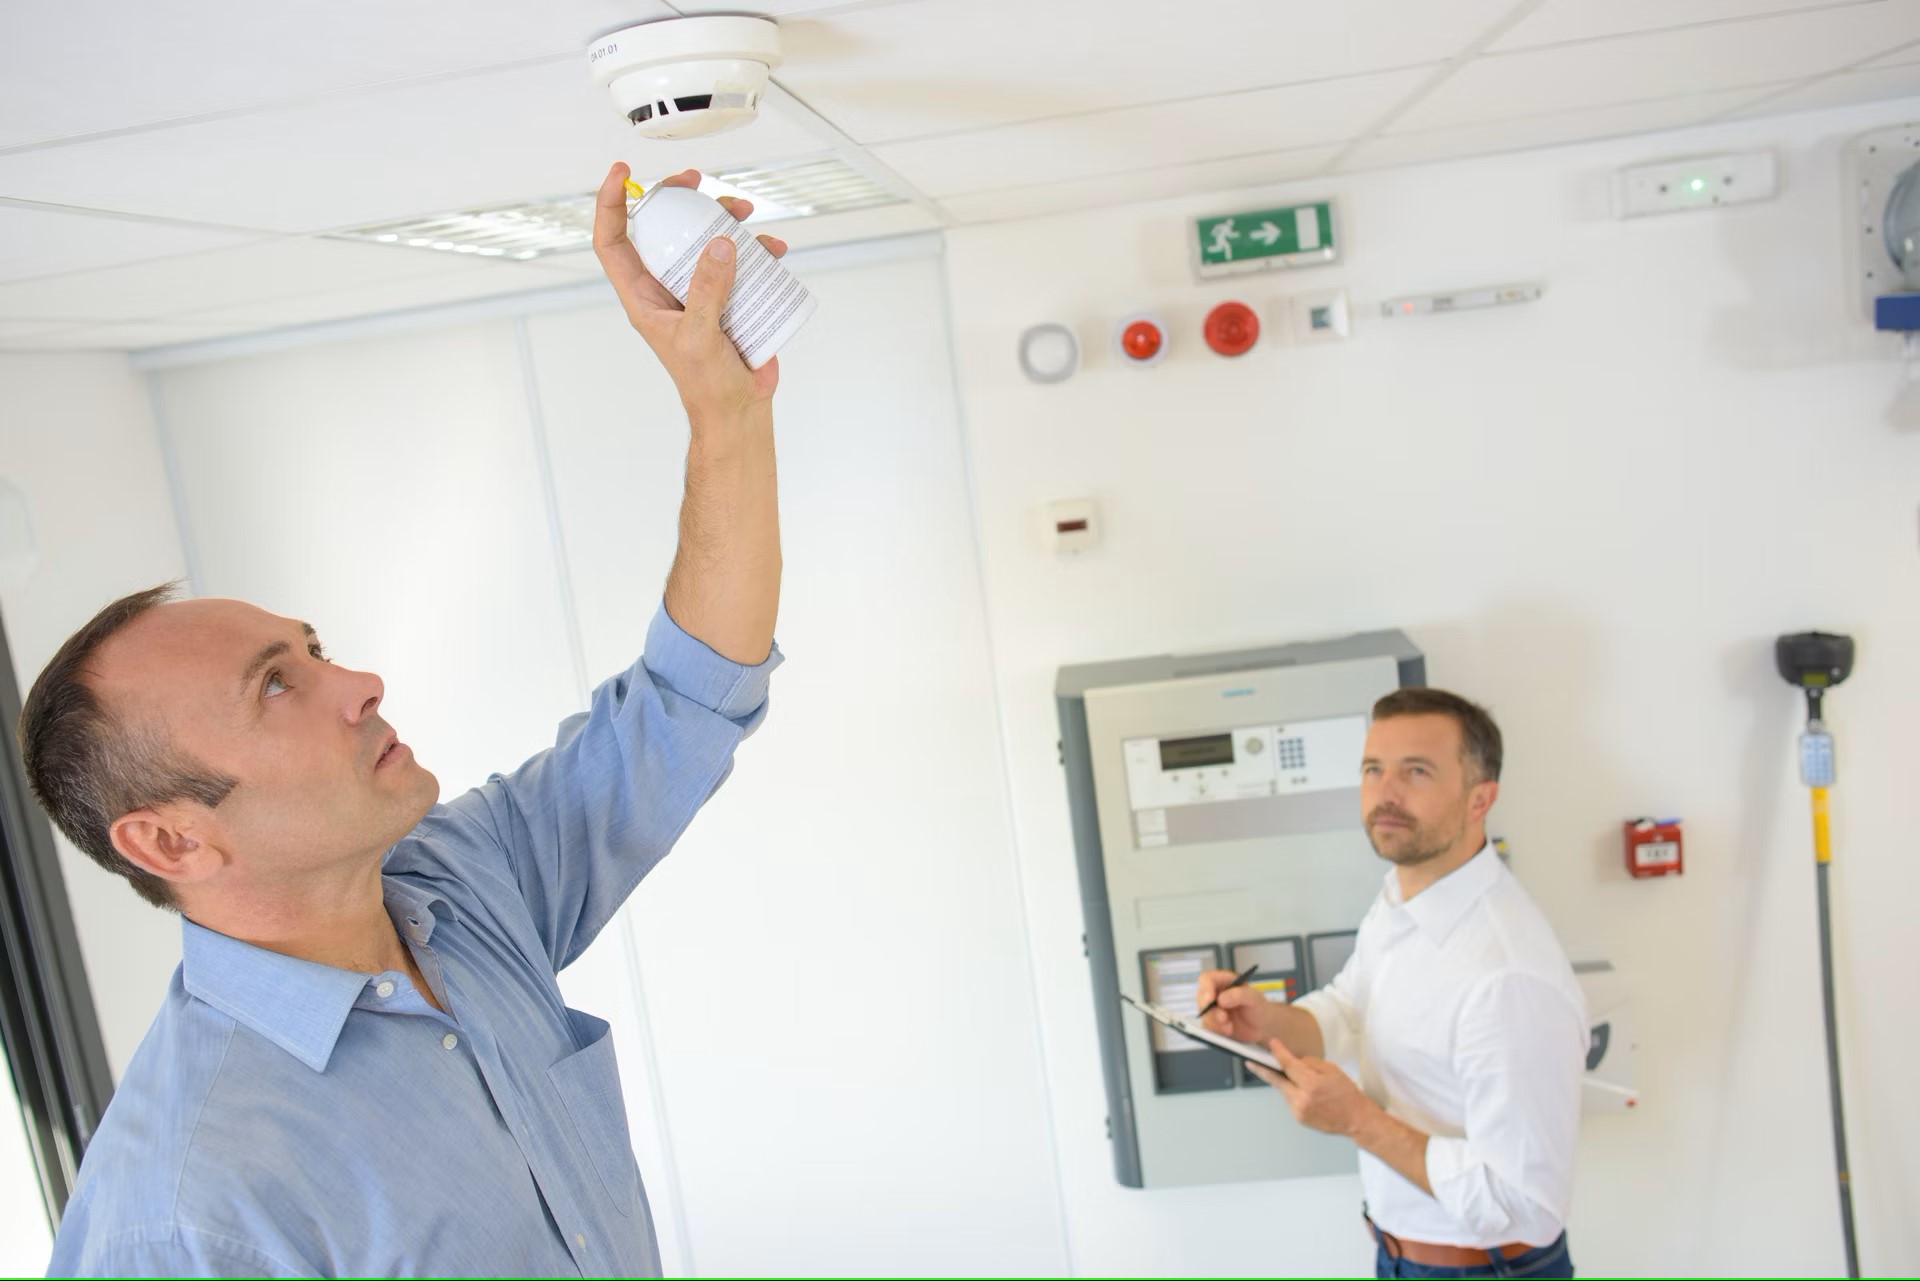 What Document Sets The Standards For The Design And Installation Of Fire Detection And Alarm Systems